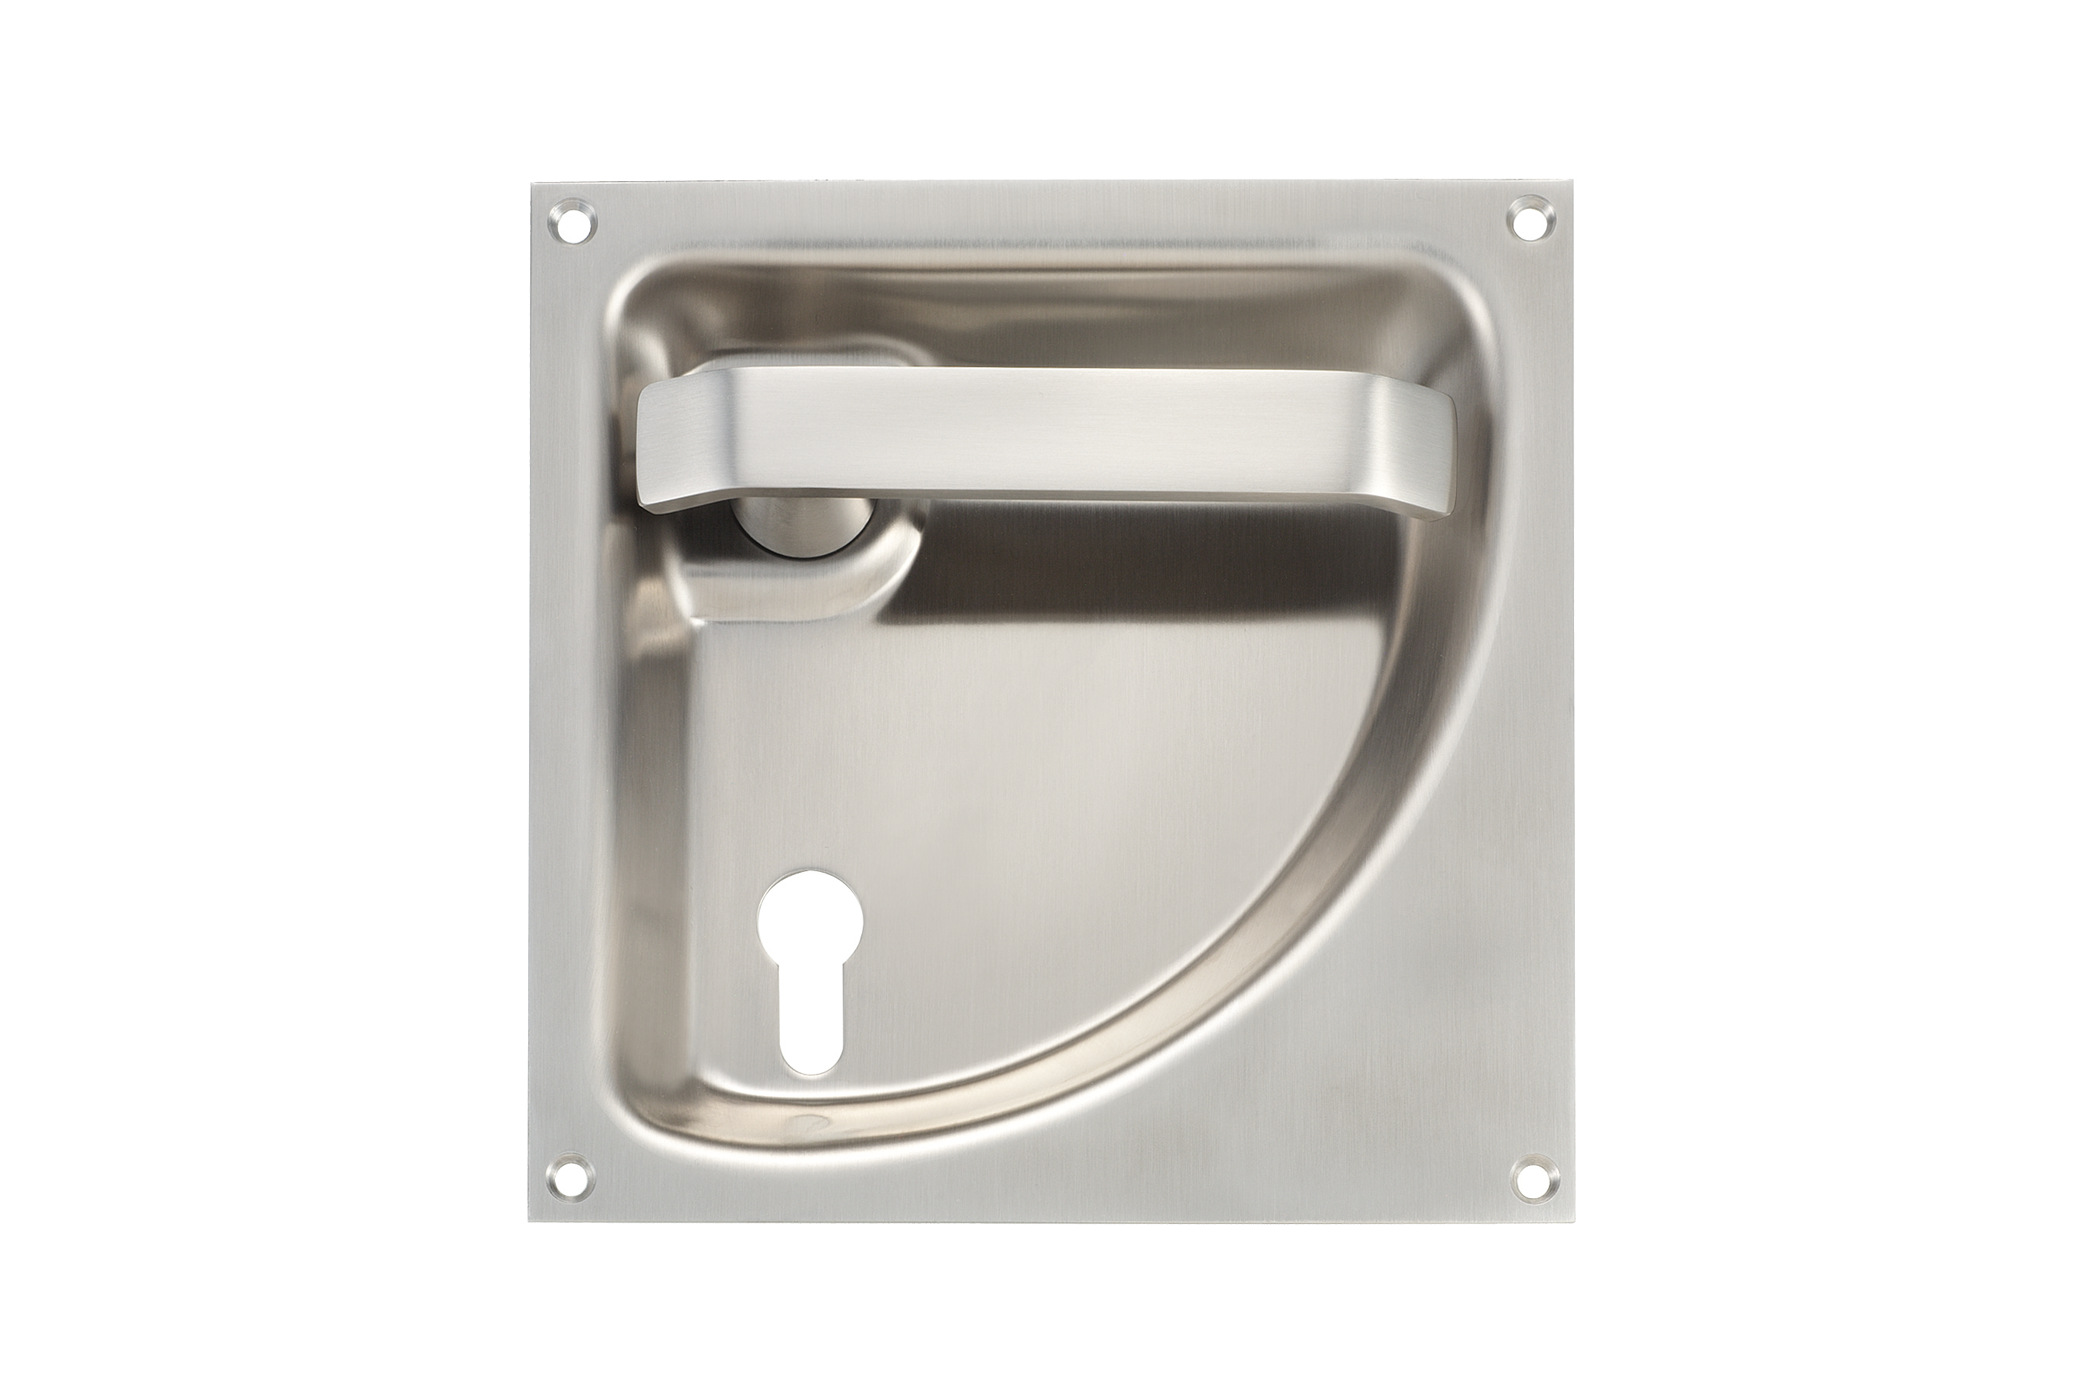 KWS Flush handle 5061 in finish 82 (stainless steel, matte) for right-opening door with 72 mm PZ keyway